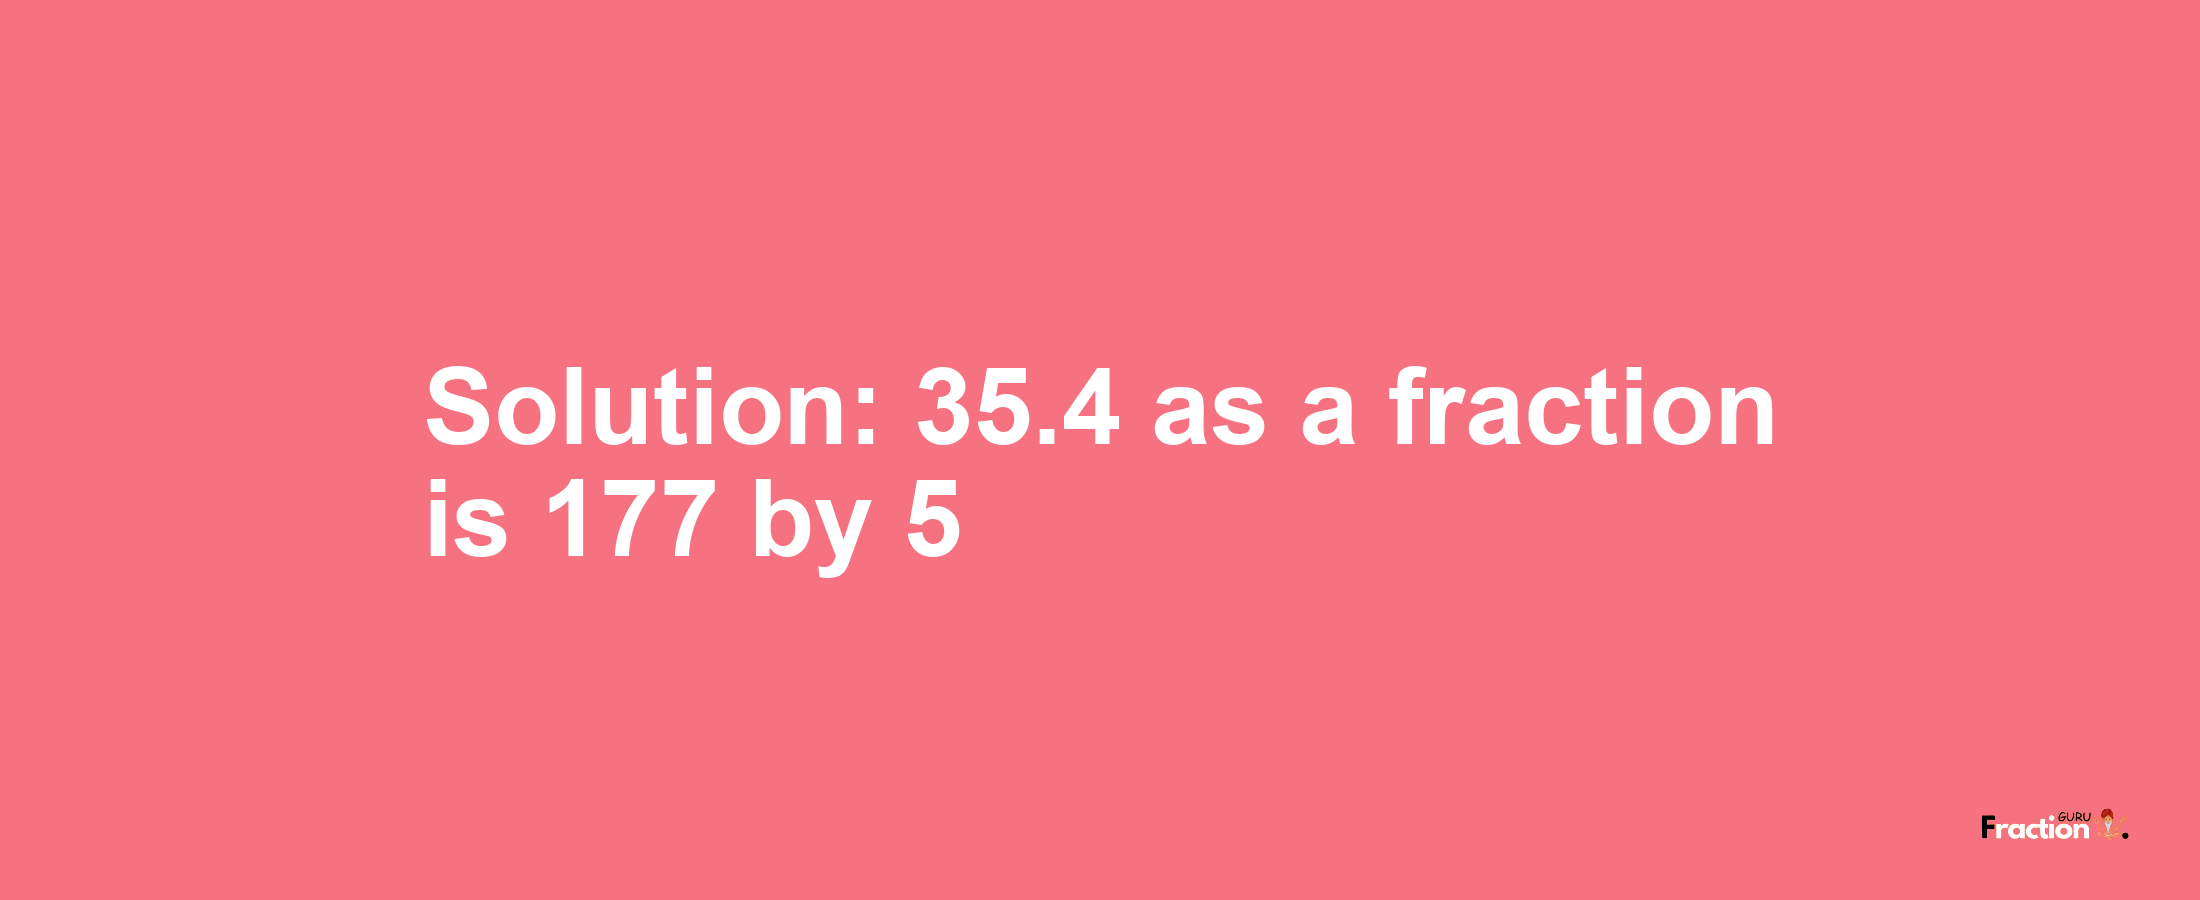 Solution:35.4 as a fraction is 177/5